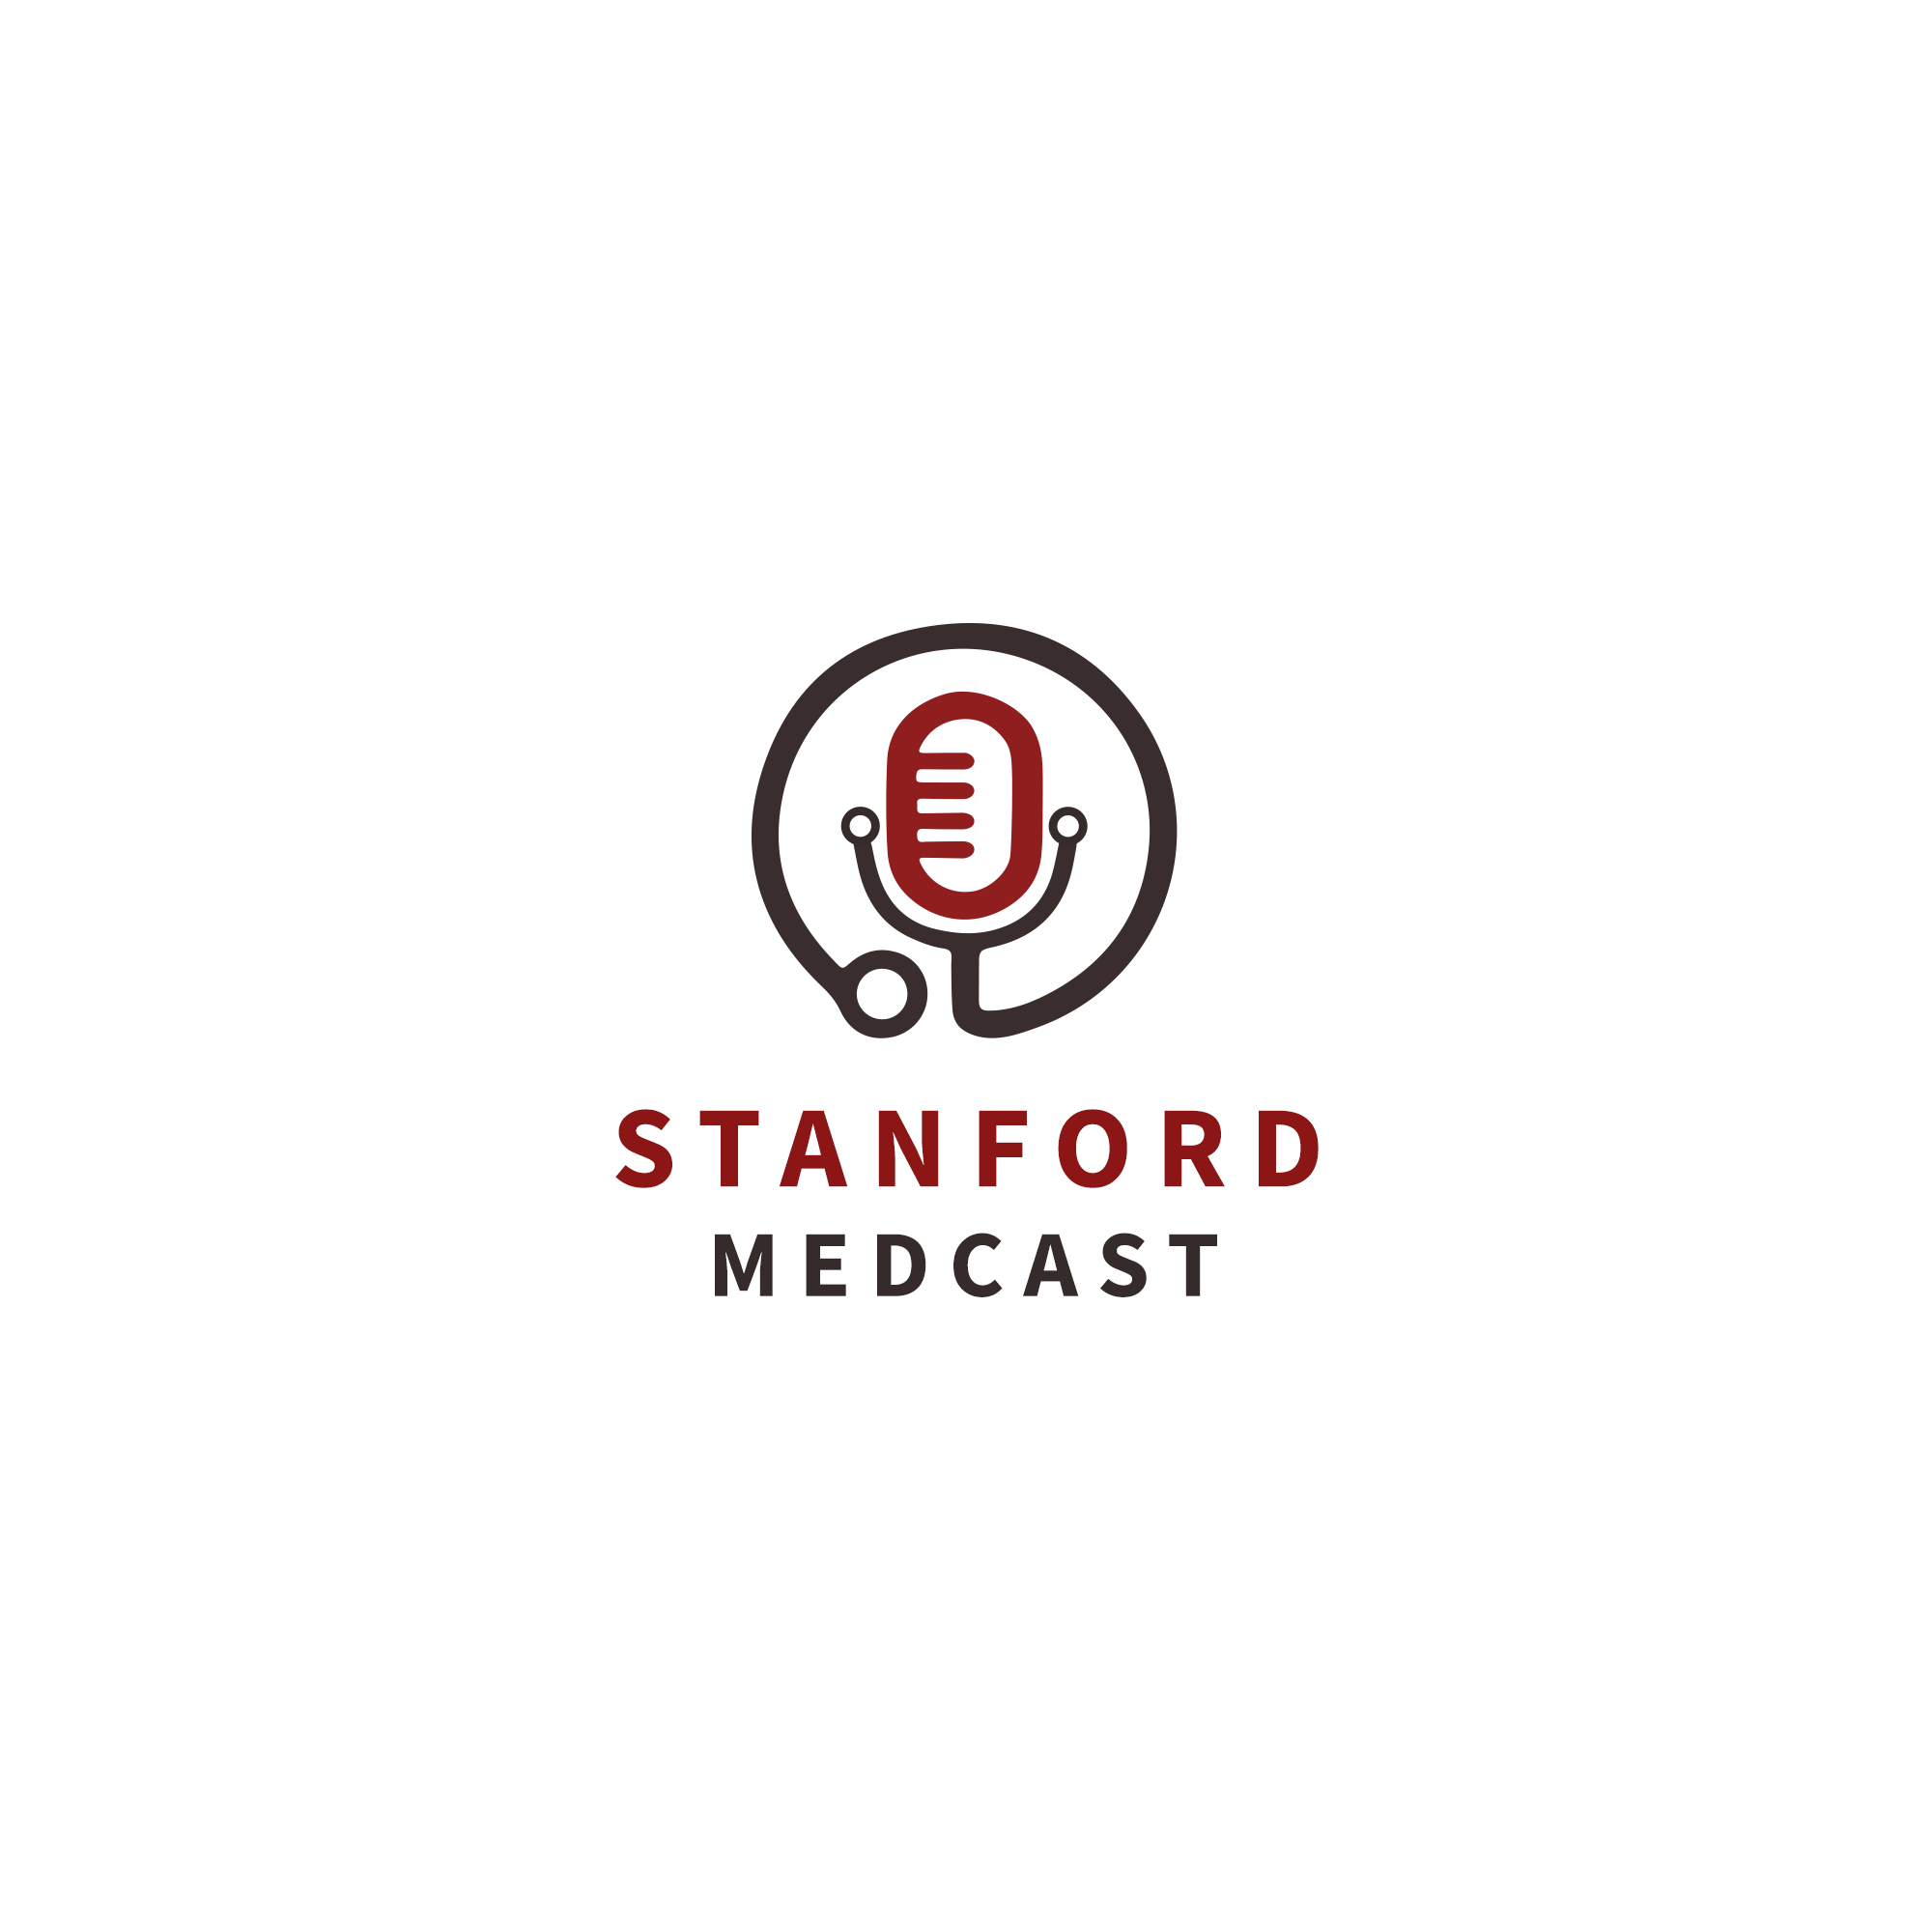 Stanford Medcast Episode 52: Hot Topics Mini-Series - Social Media: The future of medical knowledge dissemination? Banner